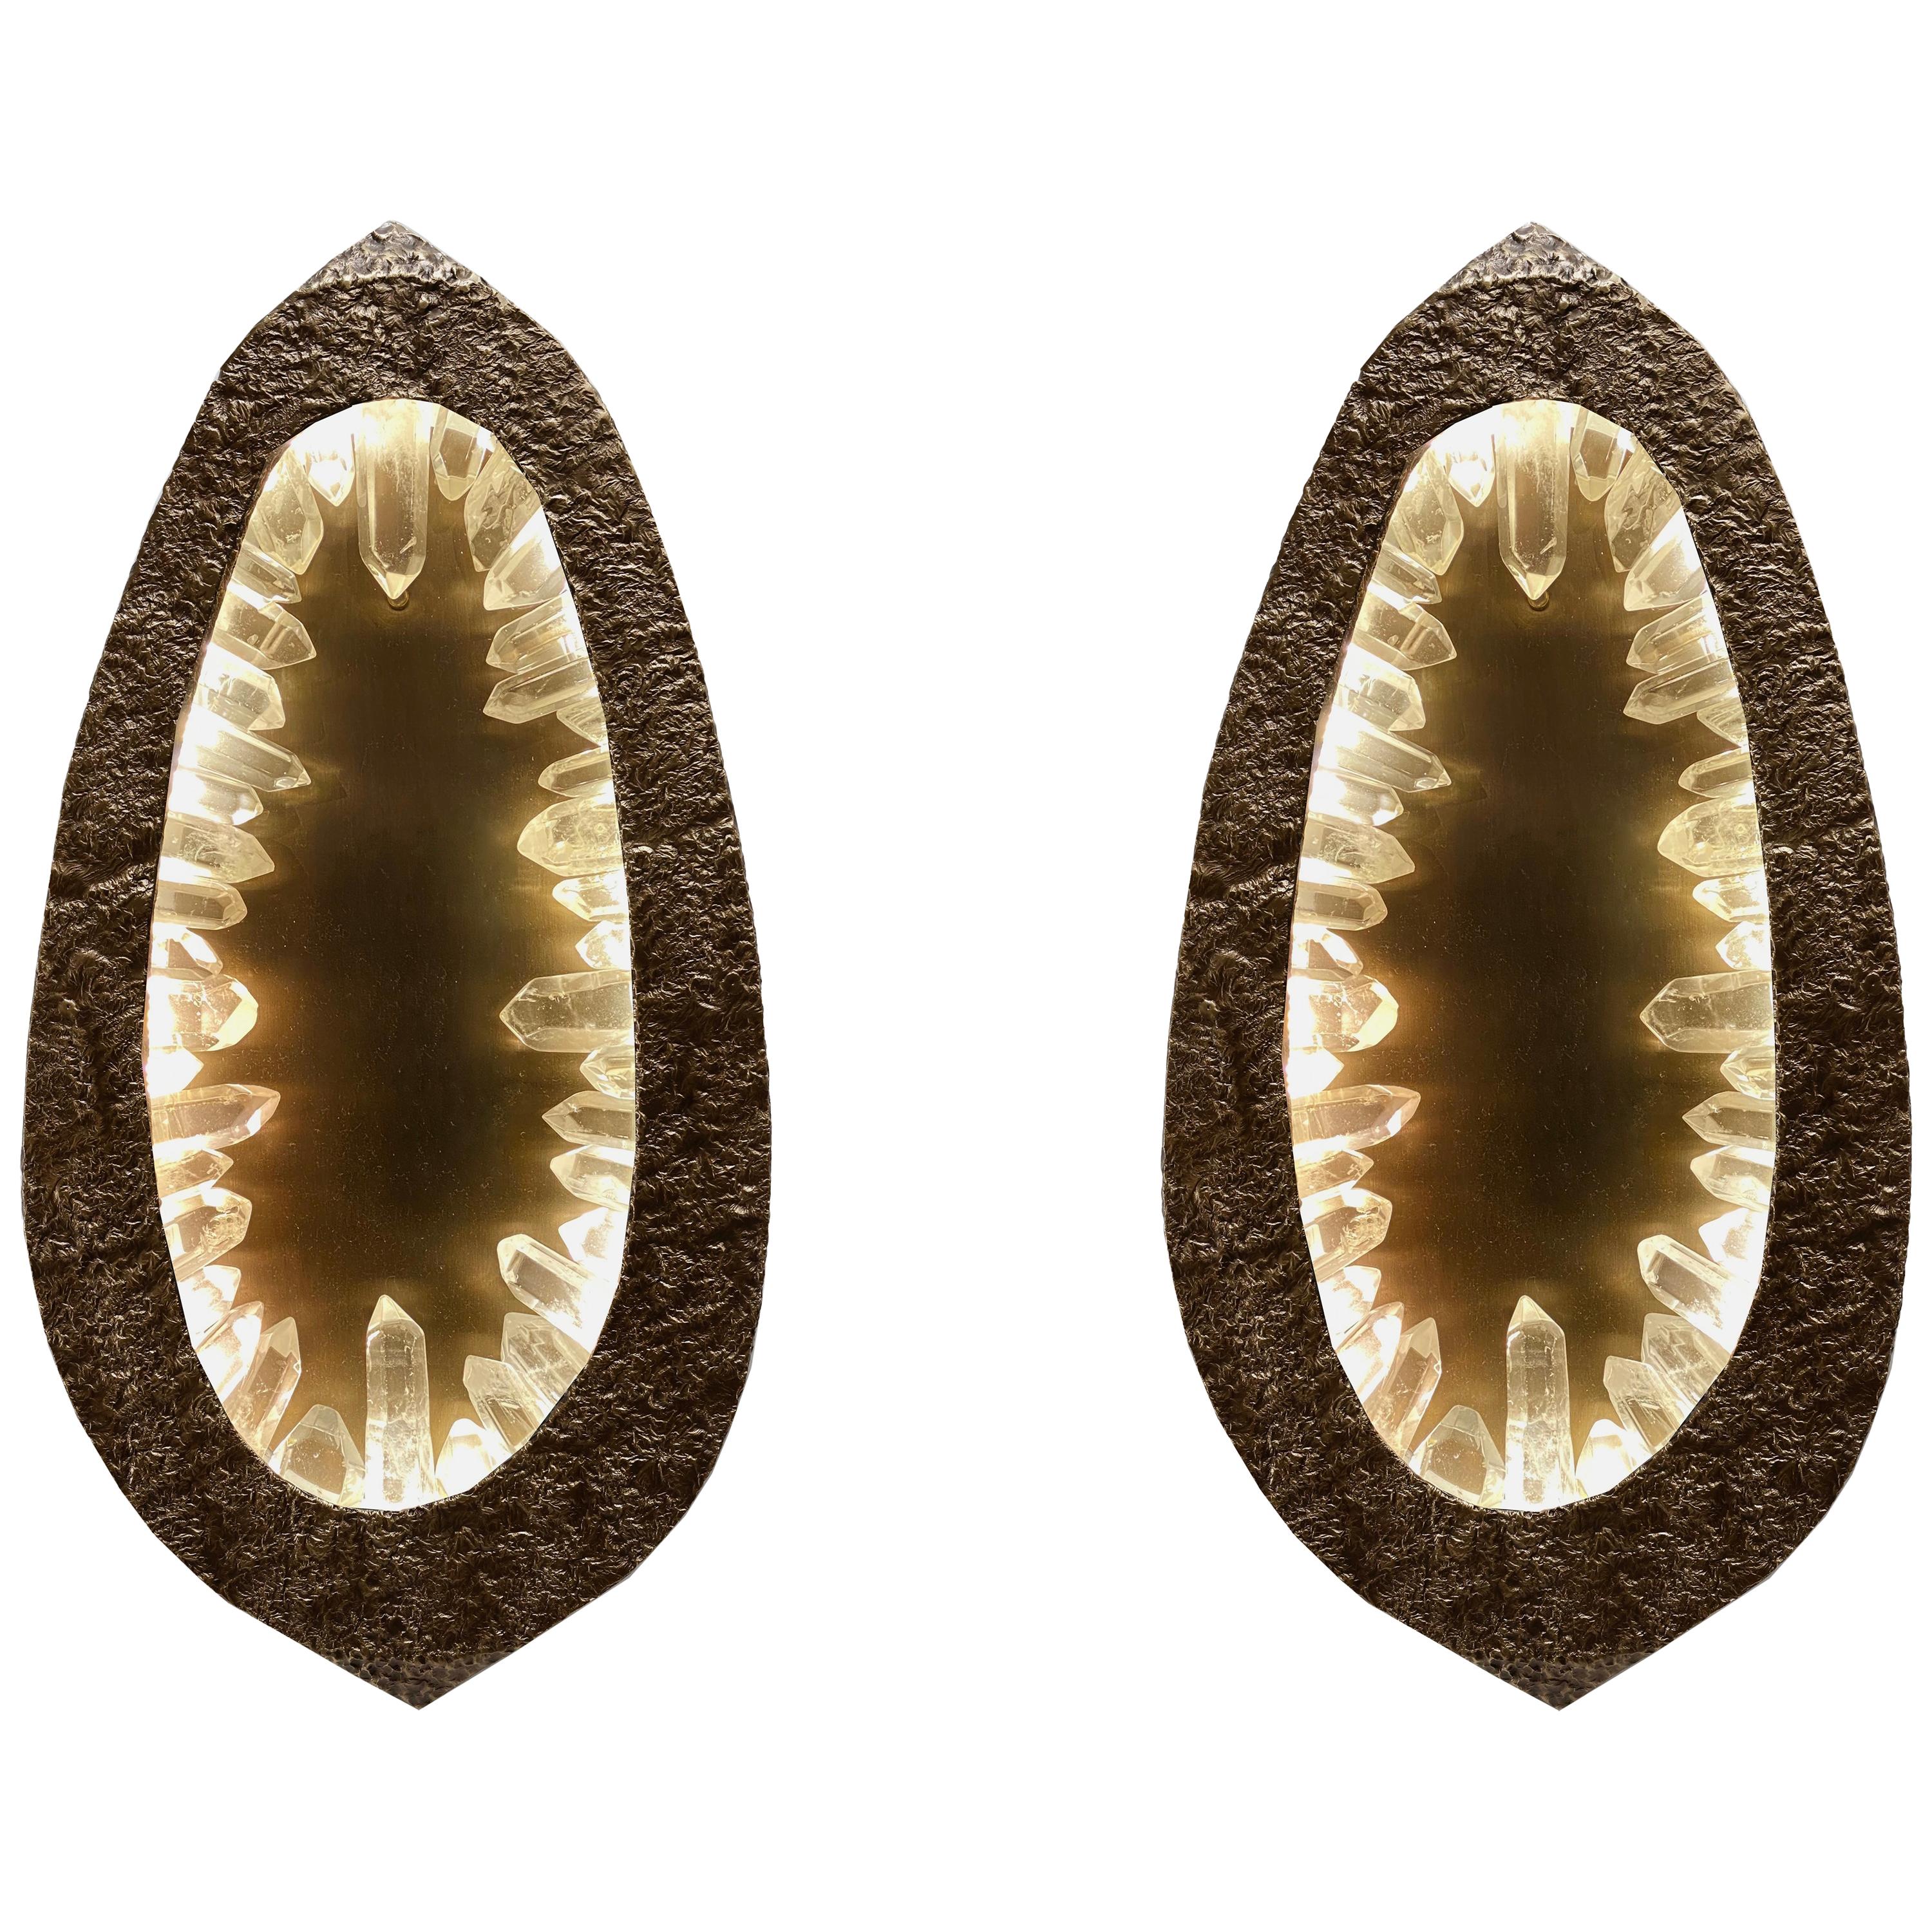 Grotto Rock Crystal Sconces by Phoenix For Sale